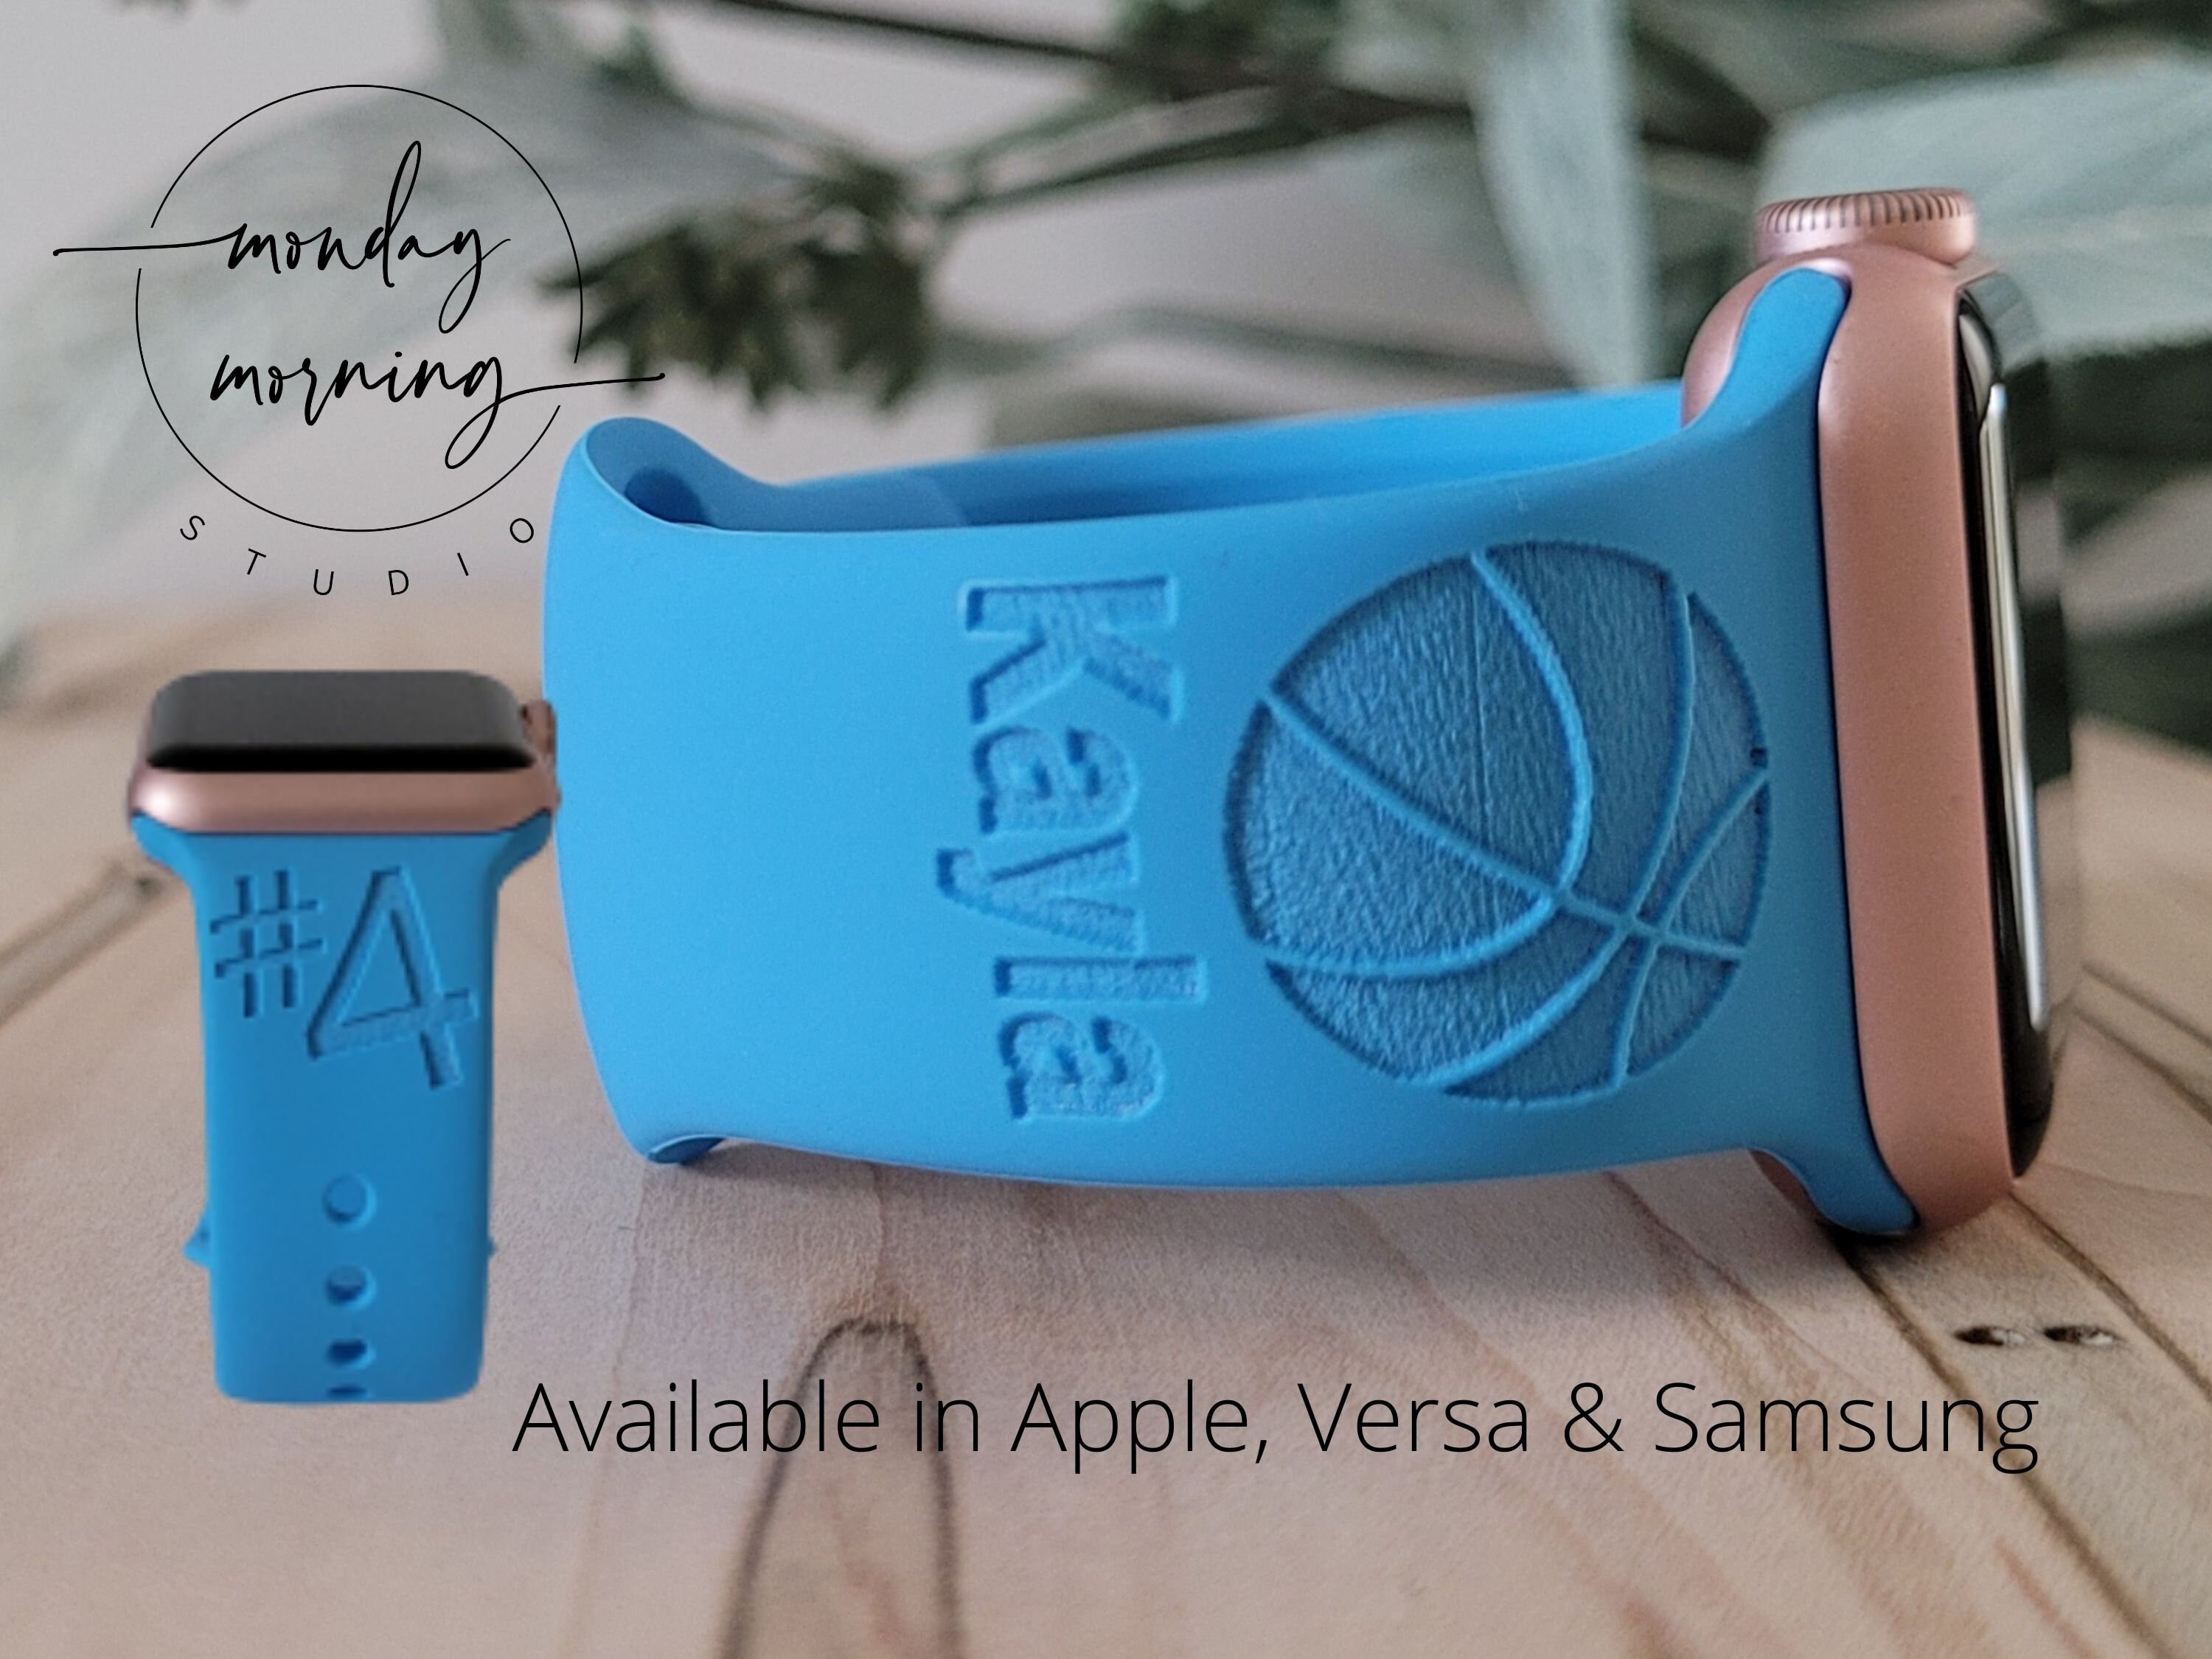 2023 NBA Basketball Silicone Sports Strap For Apple Watch band